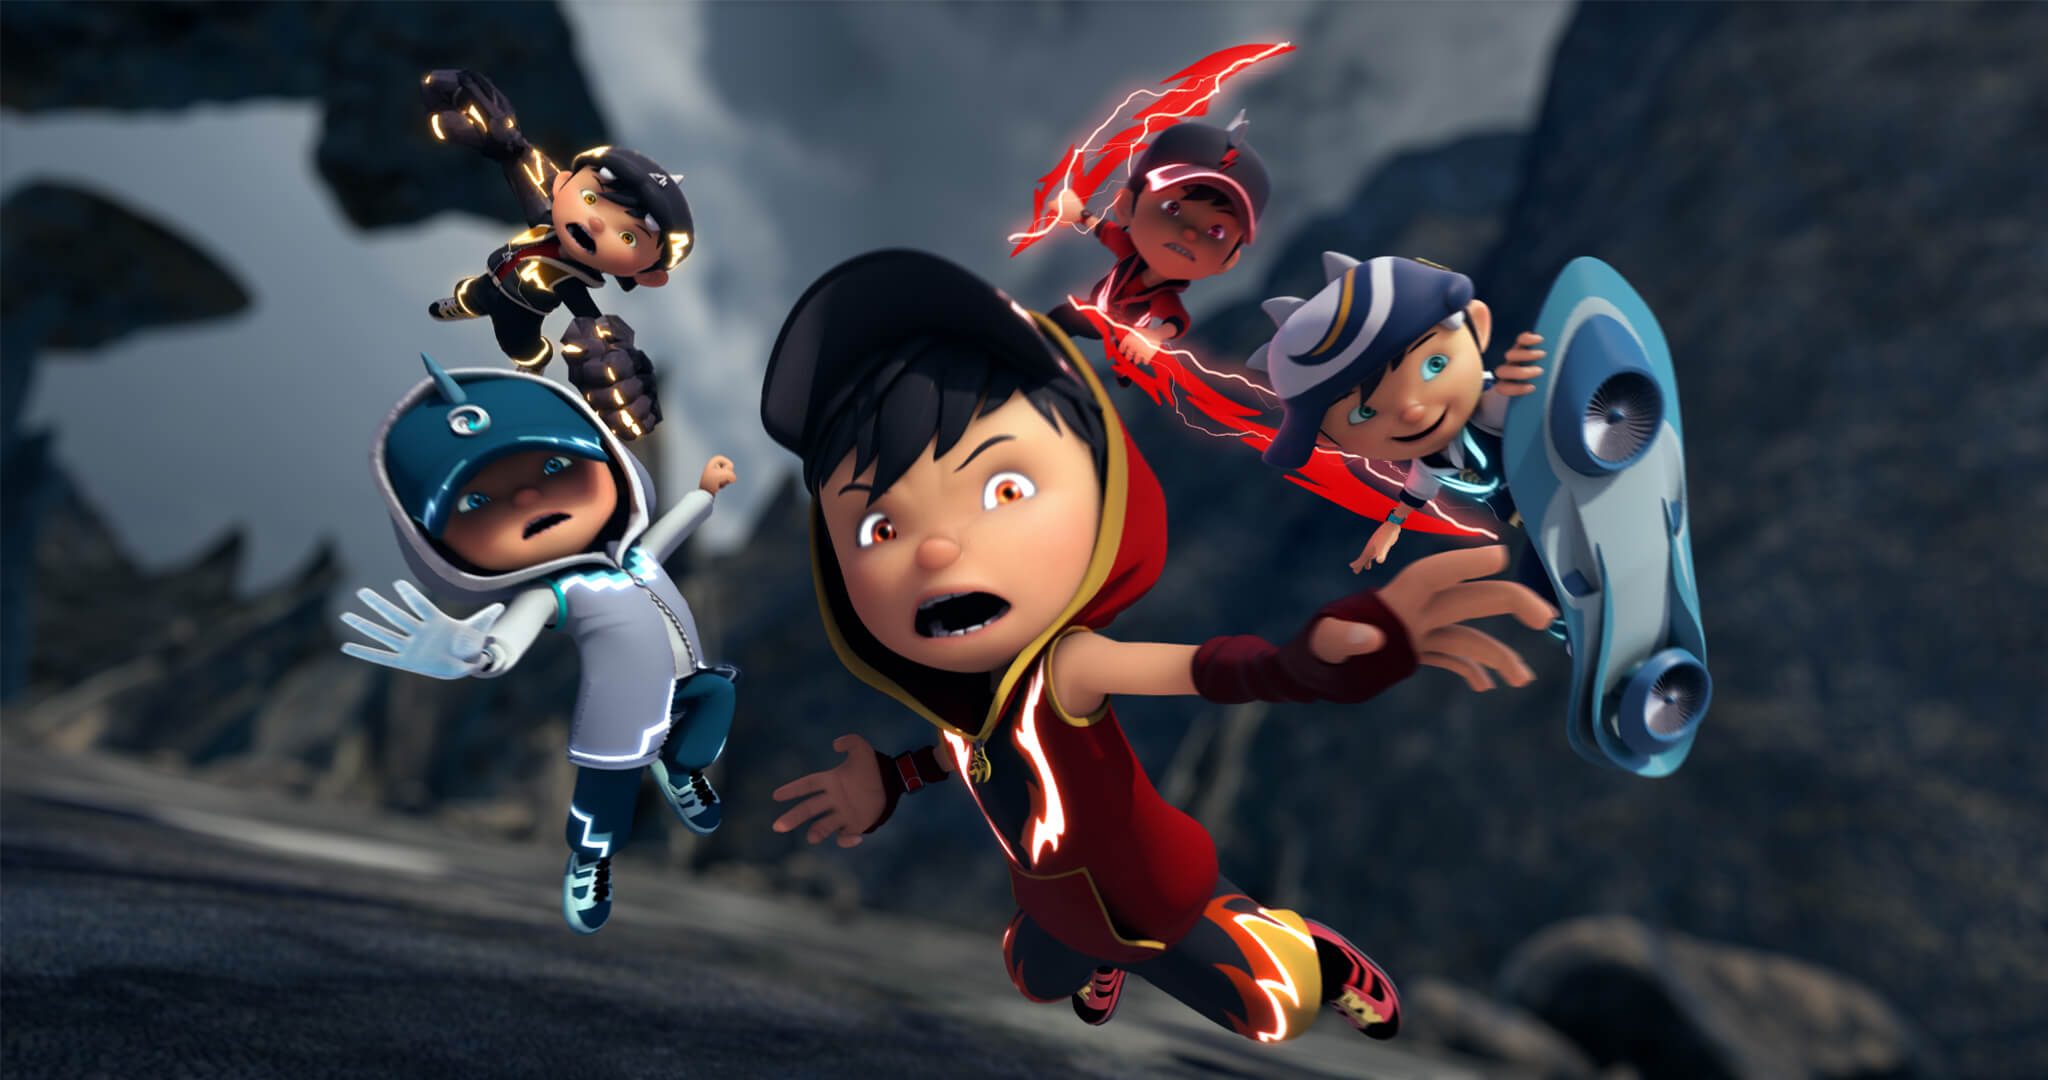 Watch BoBoiBoy  The Movie on Monsta YouTube Channel in Full 